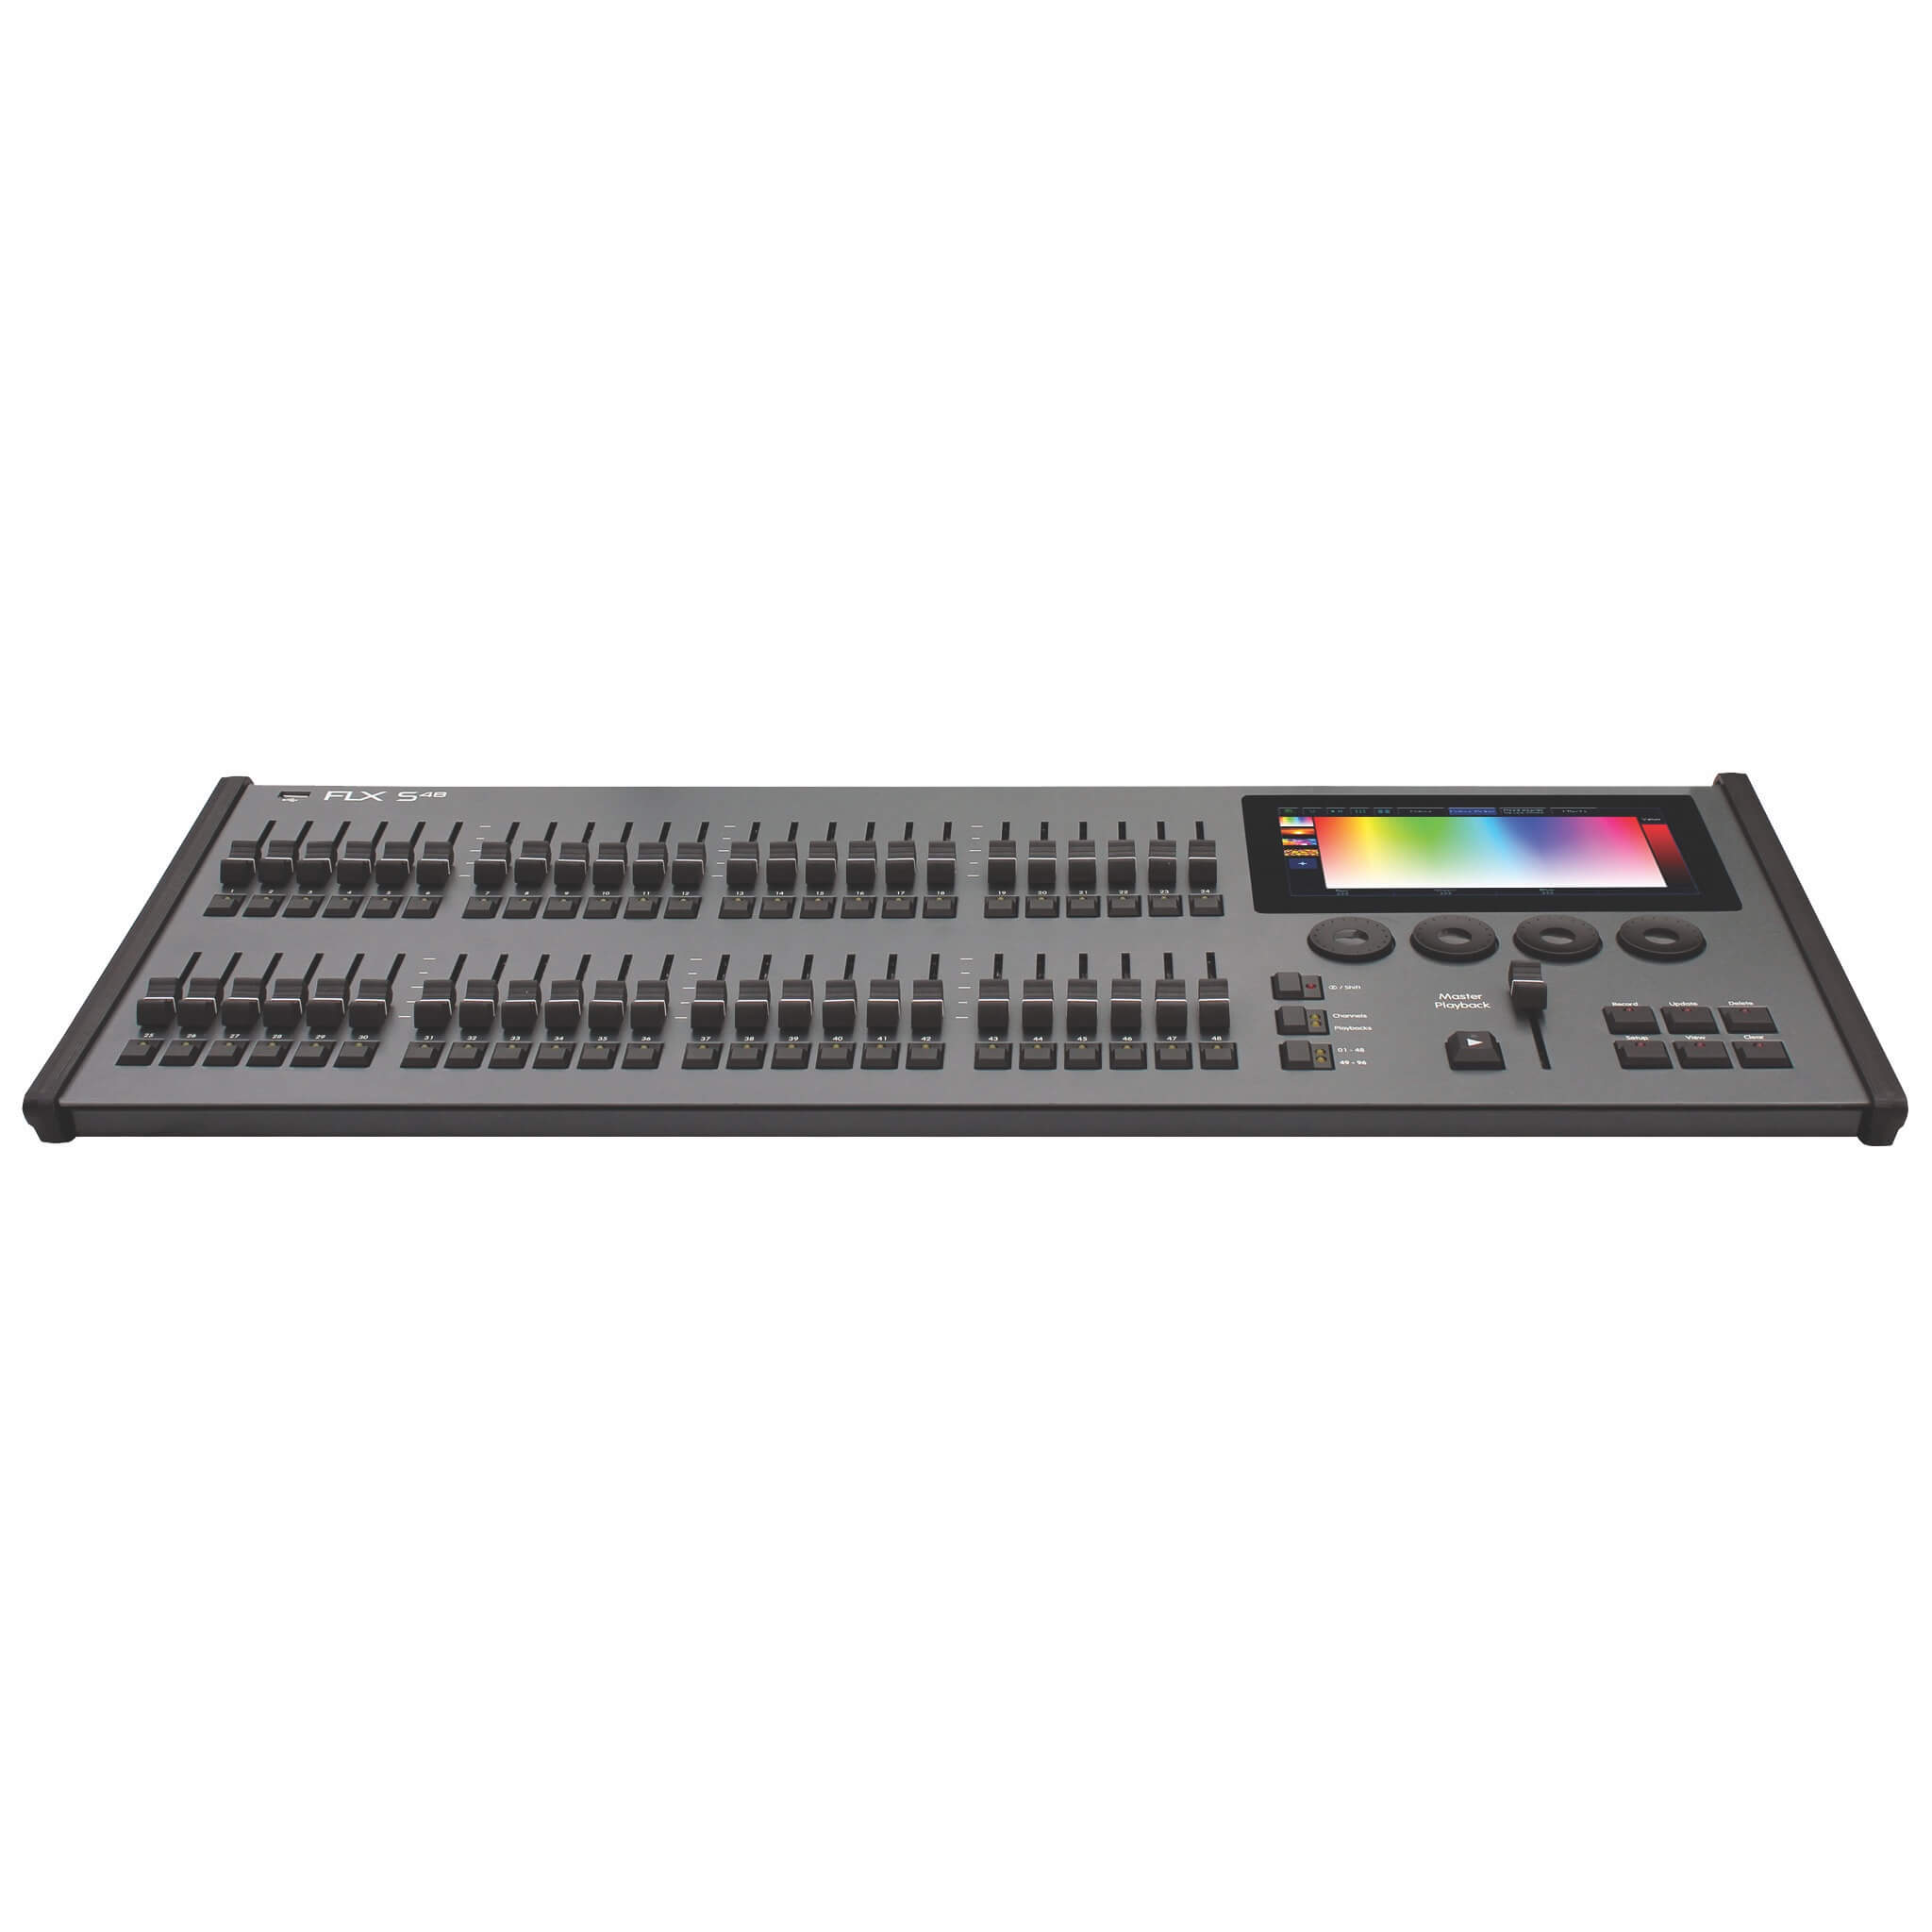 Vari-Lite FLX S48 Console - 48 Fader Lighting Control Surface, front